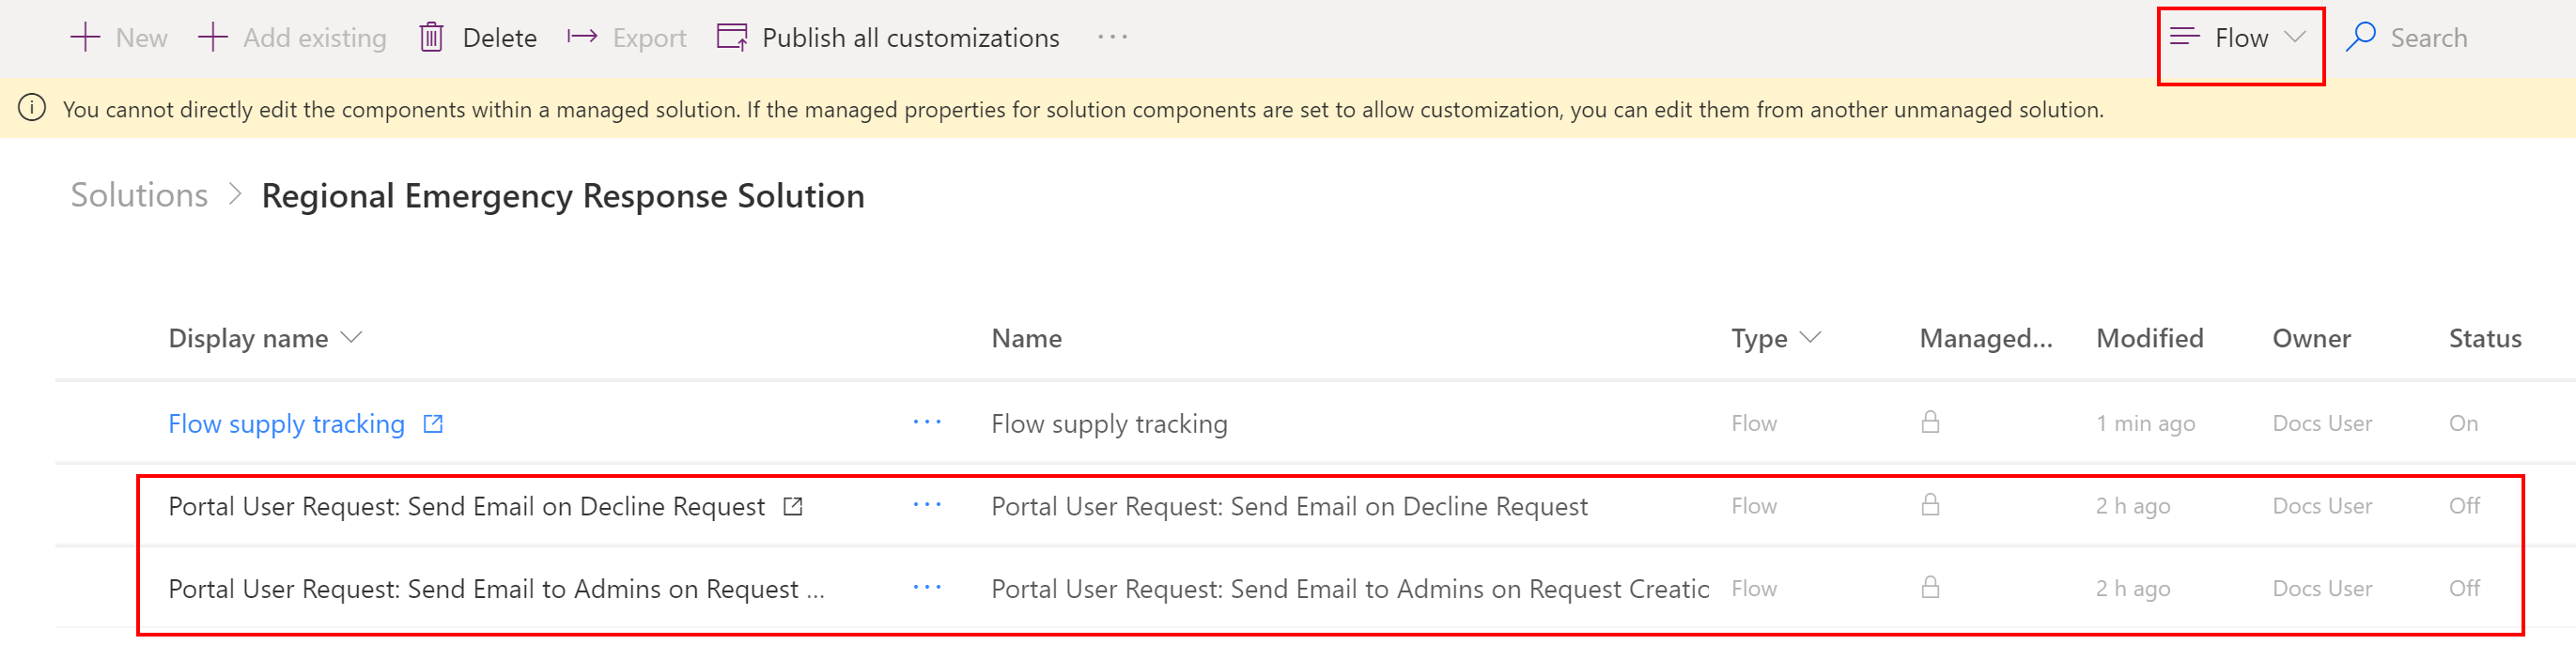 Find the Flow Supply Tracking record.